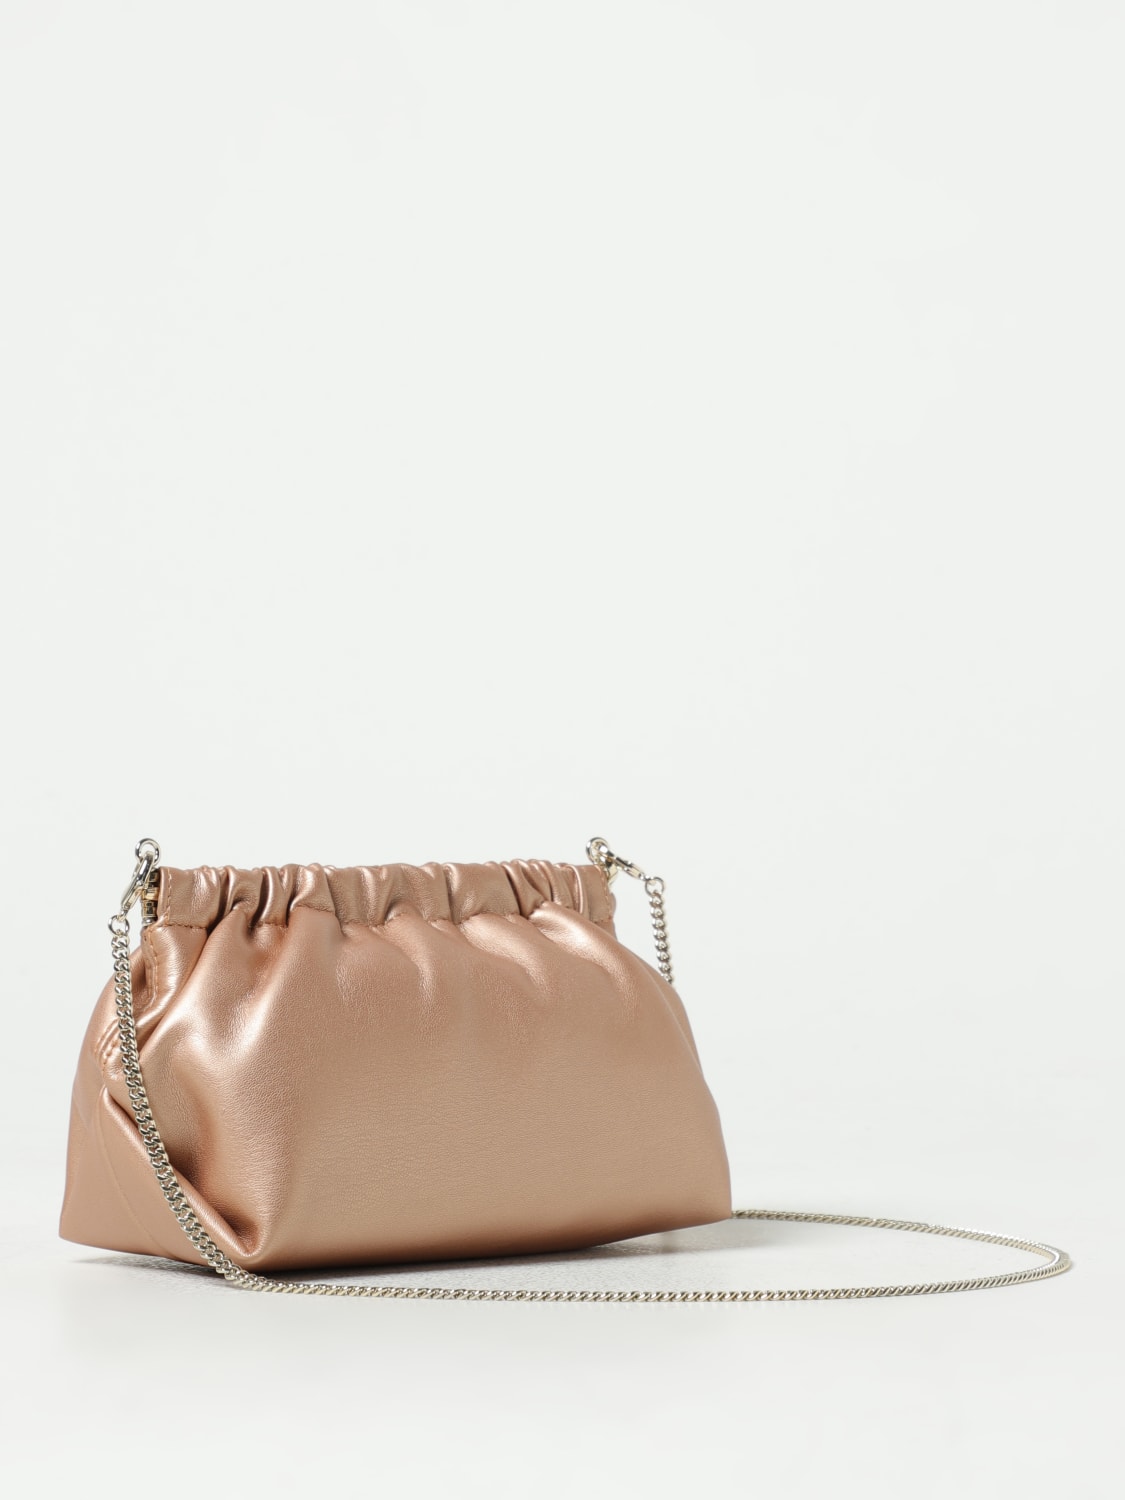 Patrizia Pepe Fly Bamby Leather Tote Bag in Metallic | Lyst